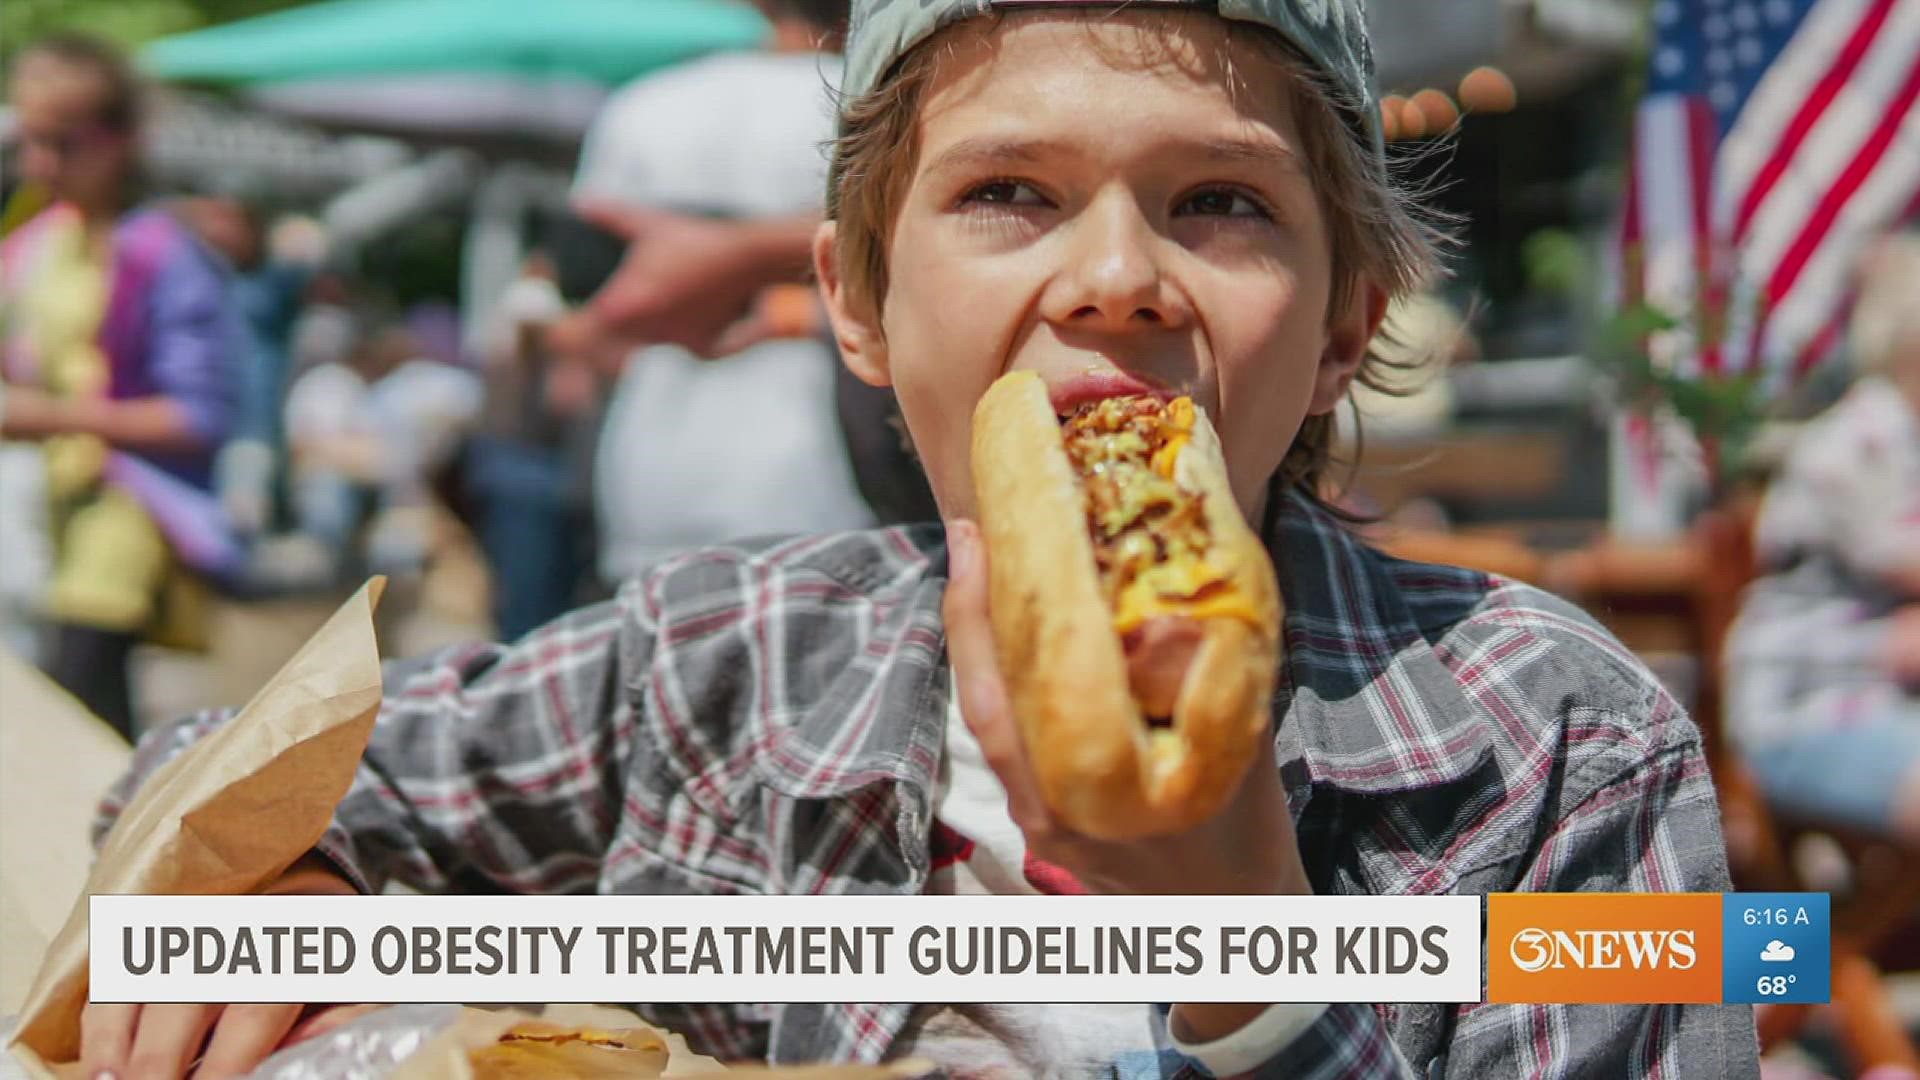 The AAP has published its first comprehensive guidance in 15 years that highlights more evidence than ever that obesity treatment is safe and effective.